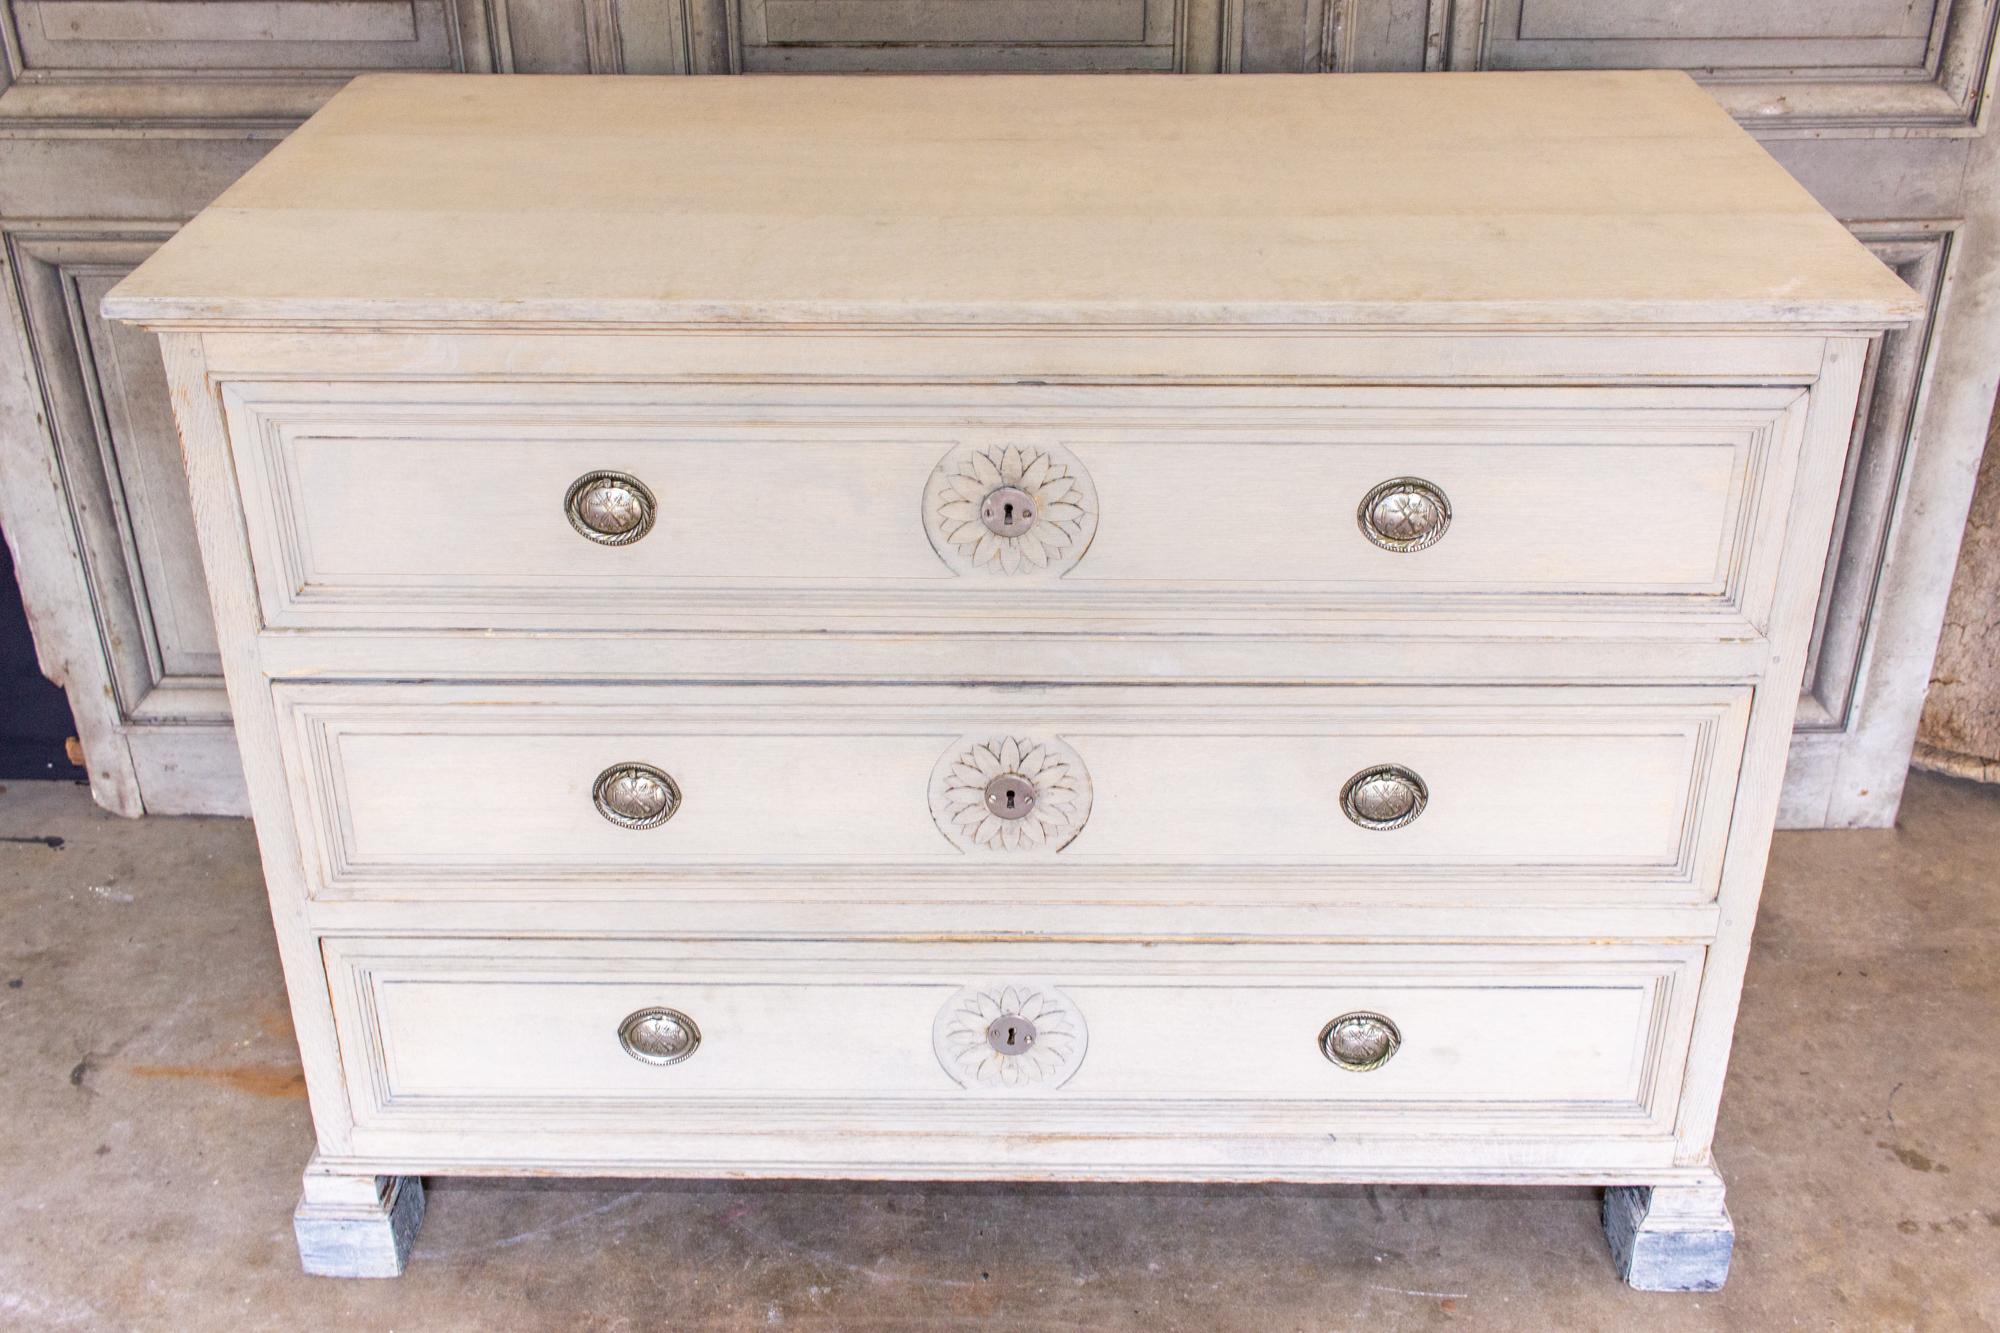 French Provincial 18th C French Oak Chest of Drawers in Whitewash Finish with Napoleonic Hardware